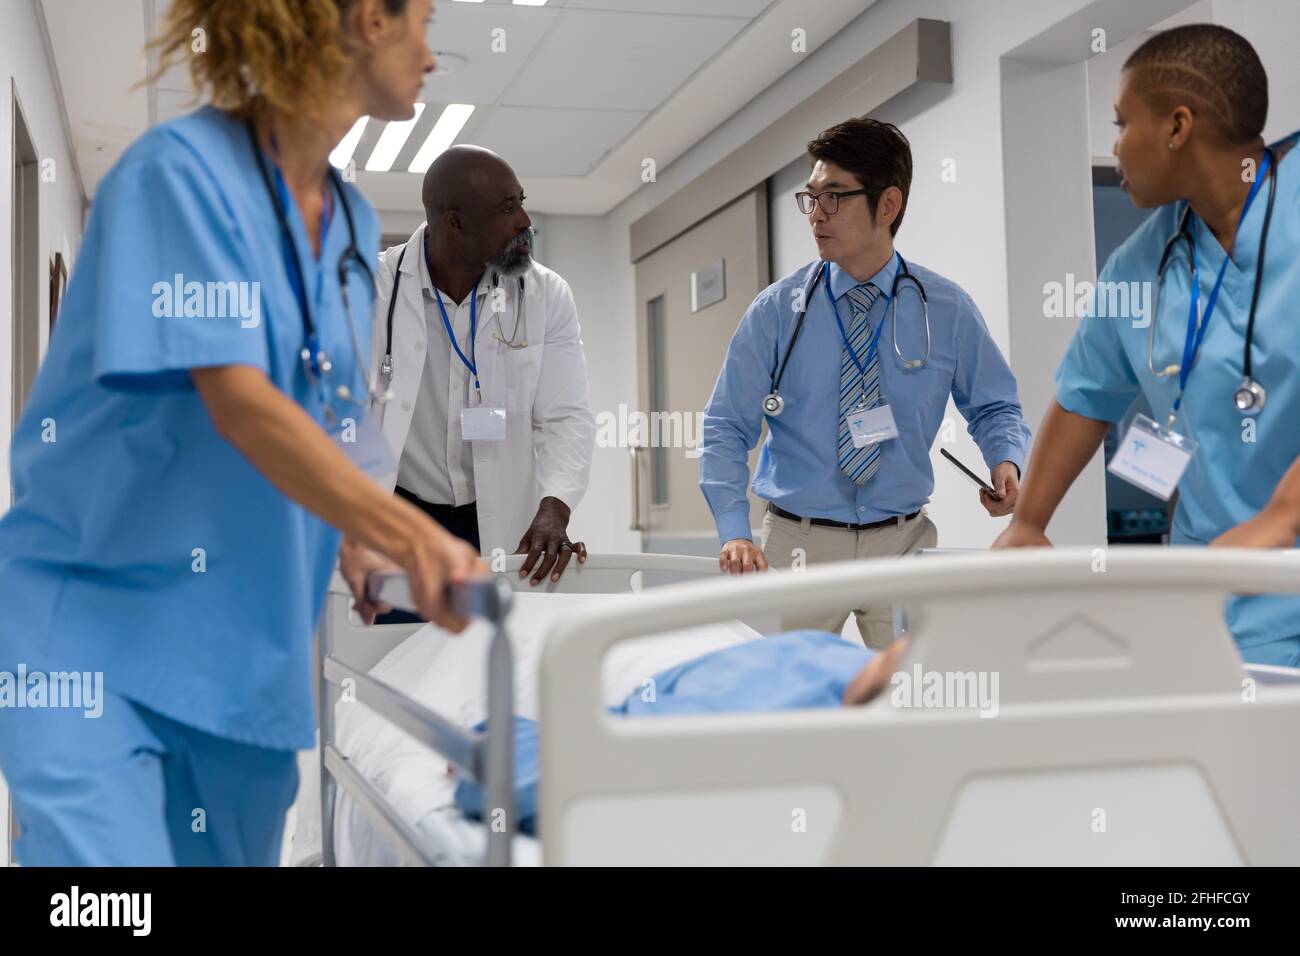 Diverse group of male and female doctors transporting patient on hospital bed Stock Photo